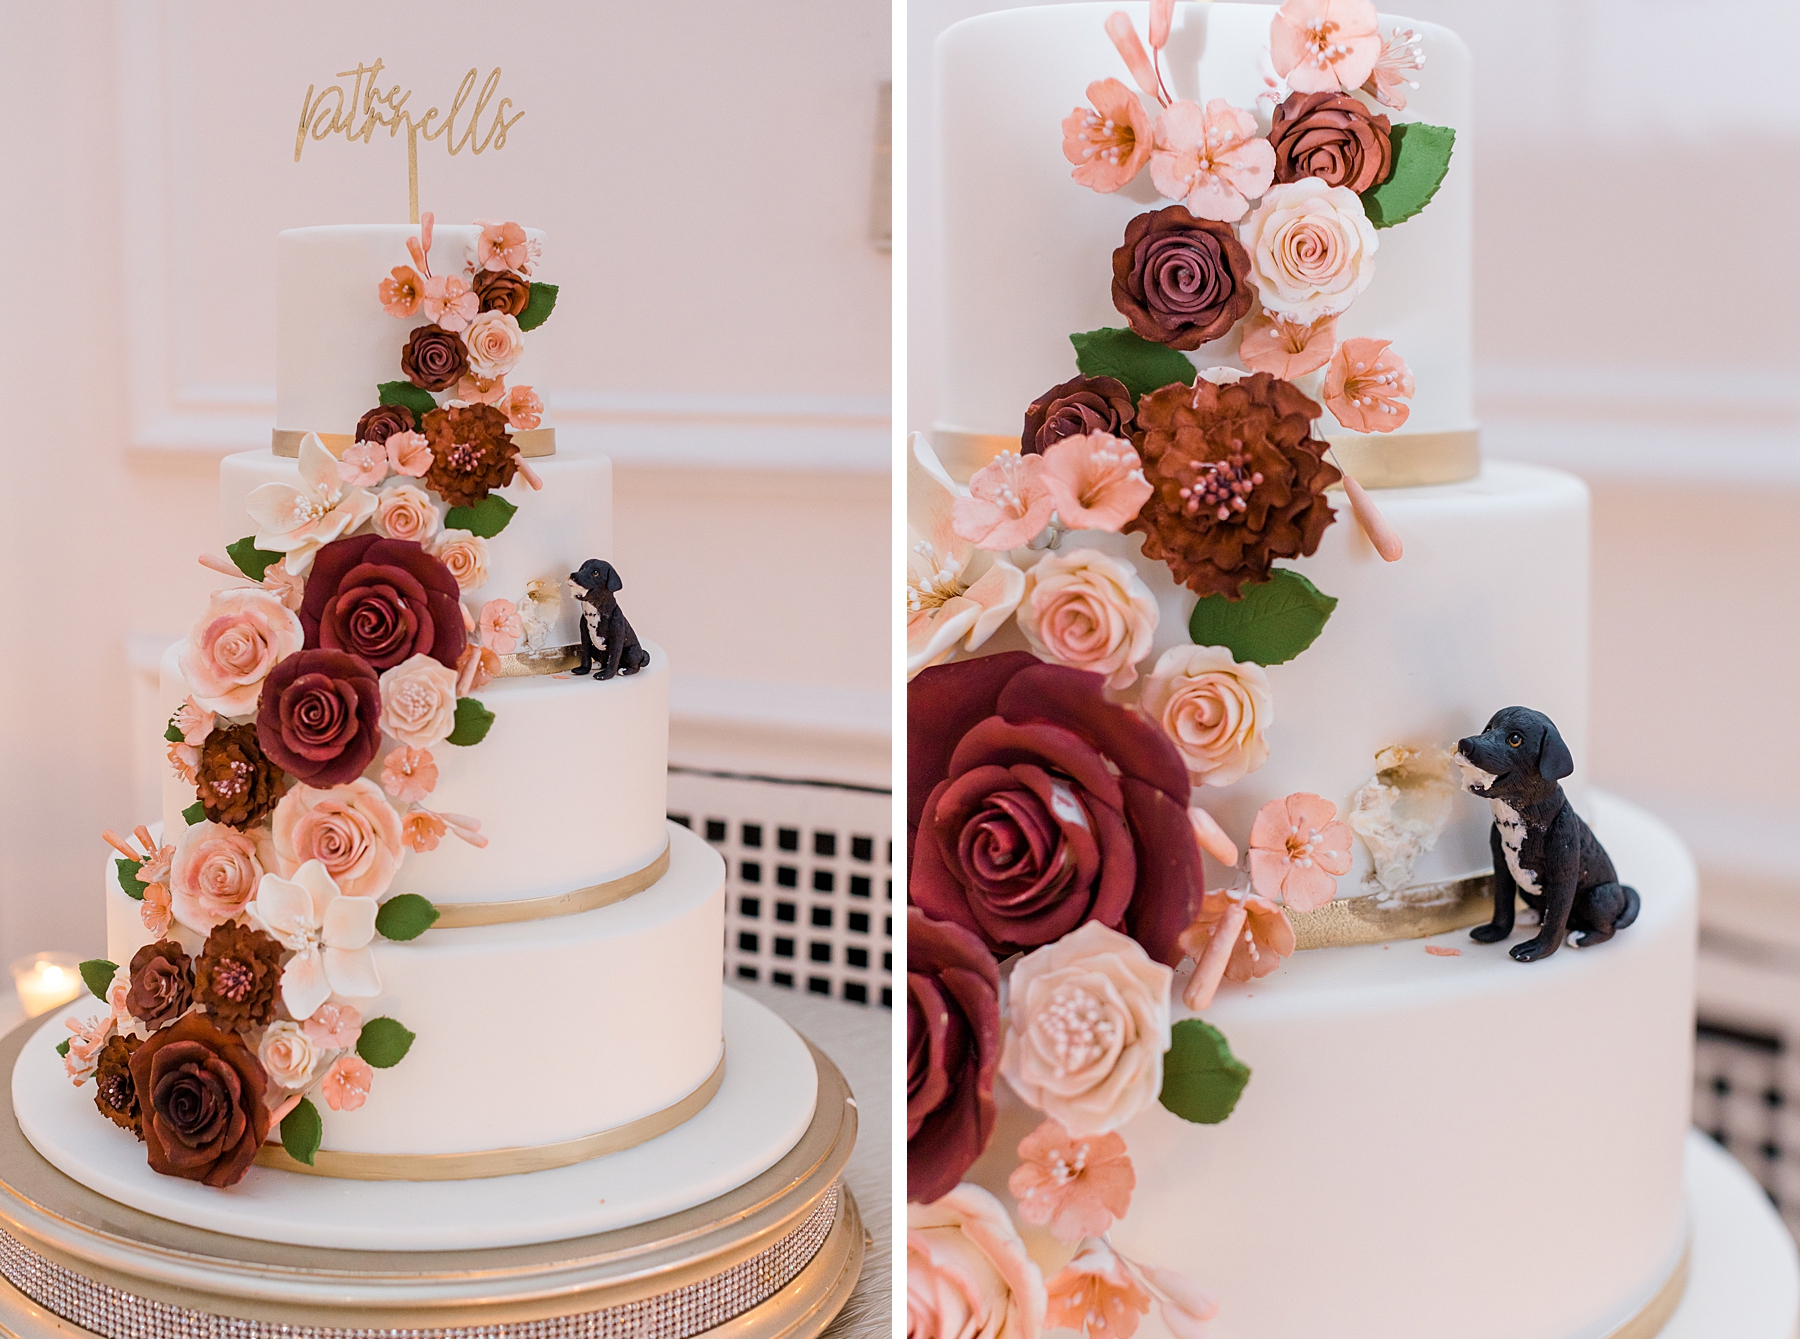 wedding cake with romantic floral decorations and dog figurine eating cake